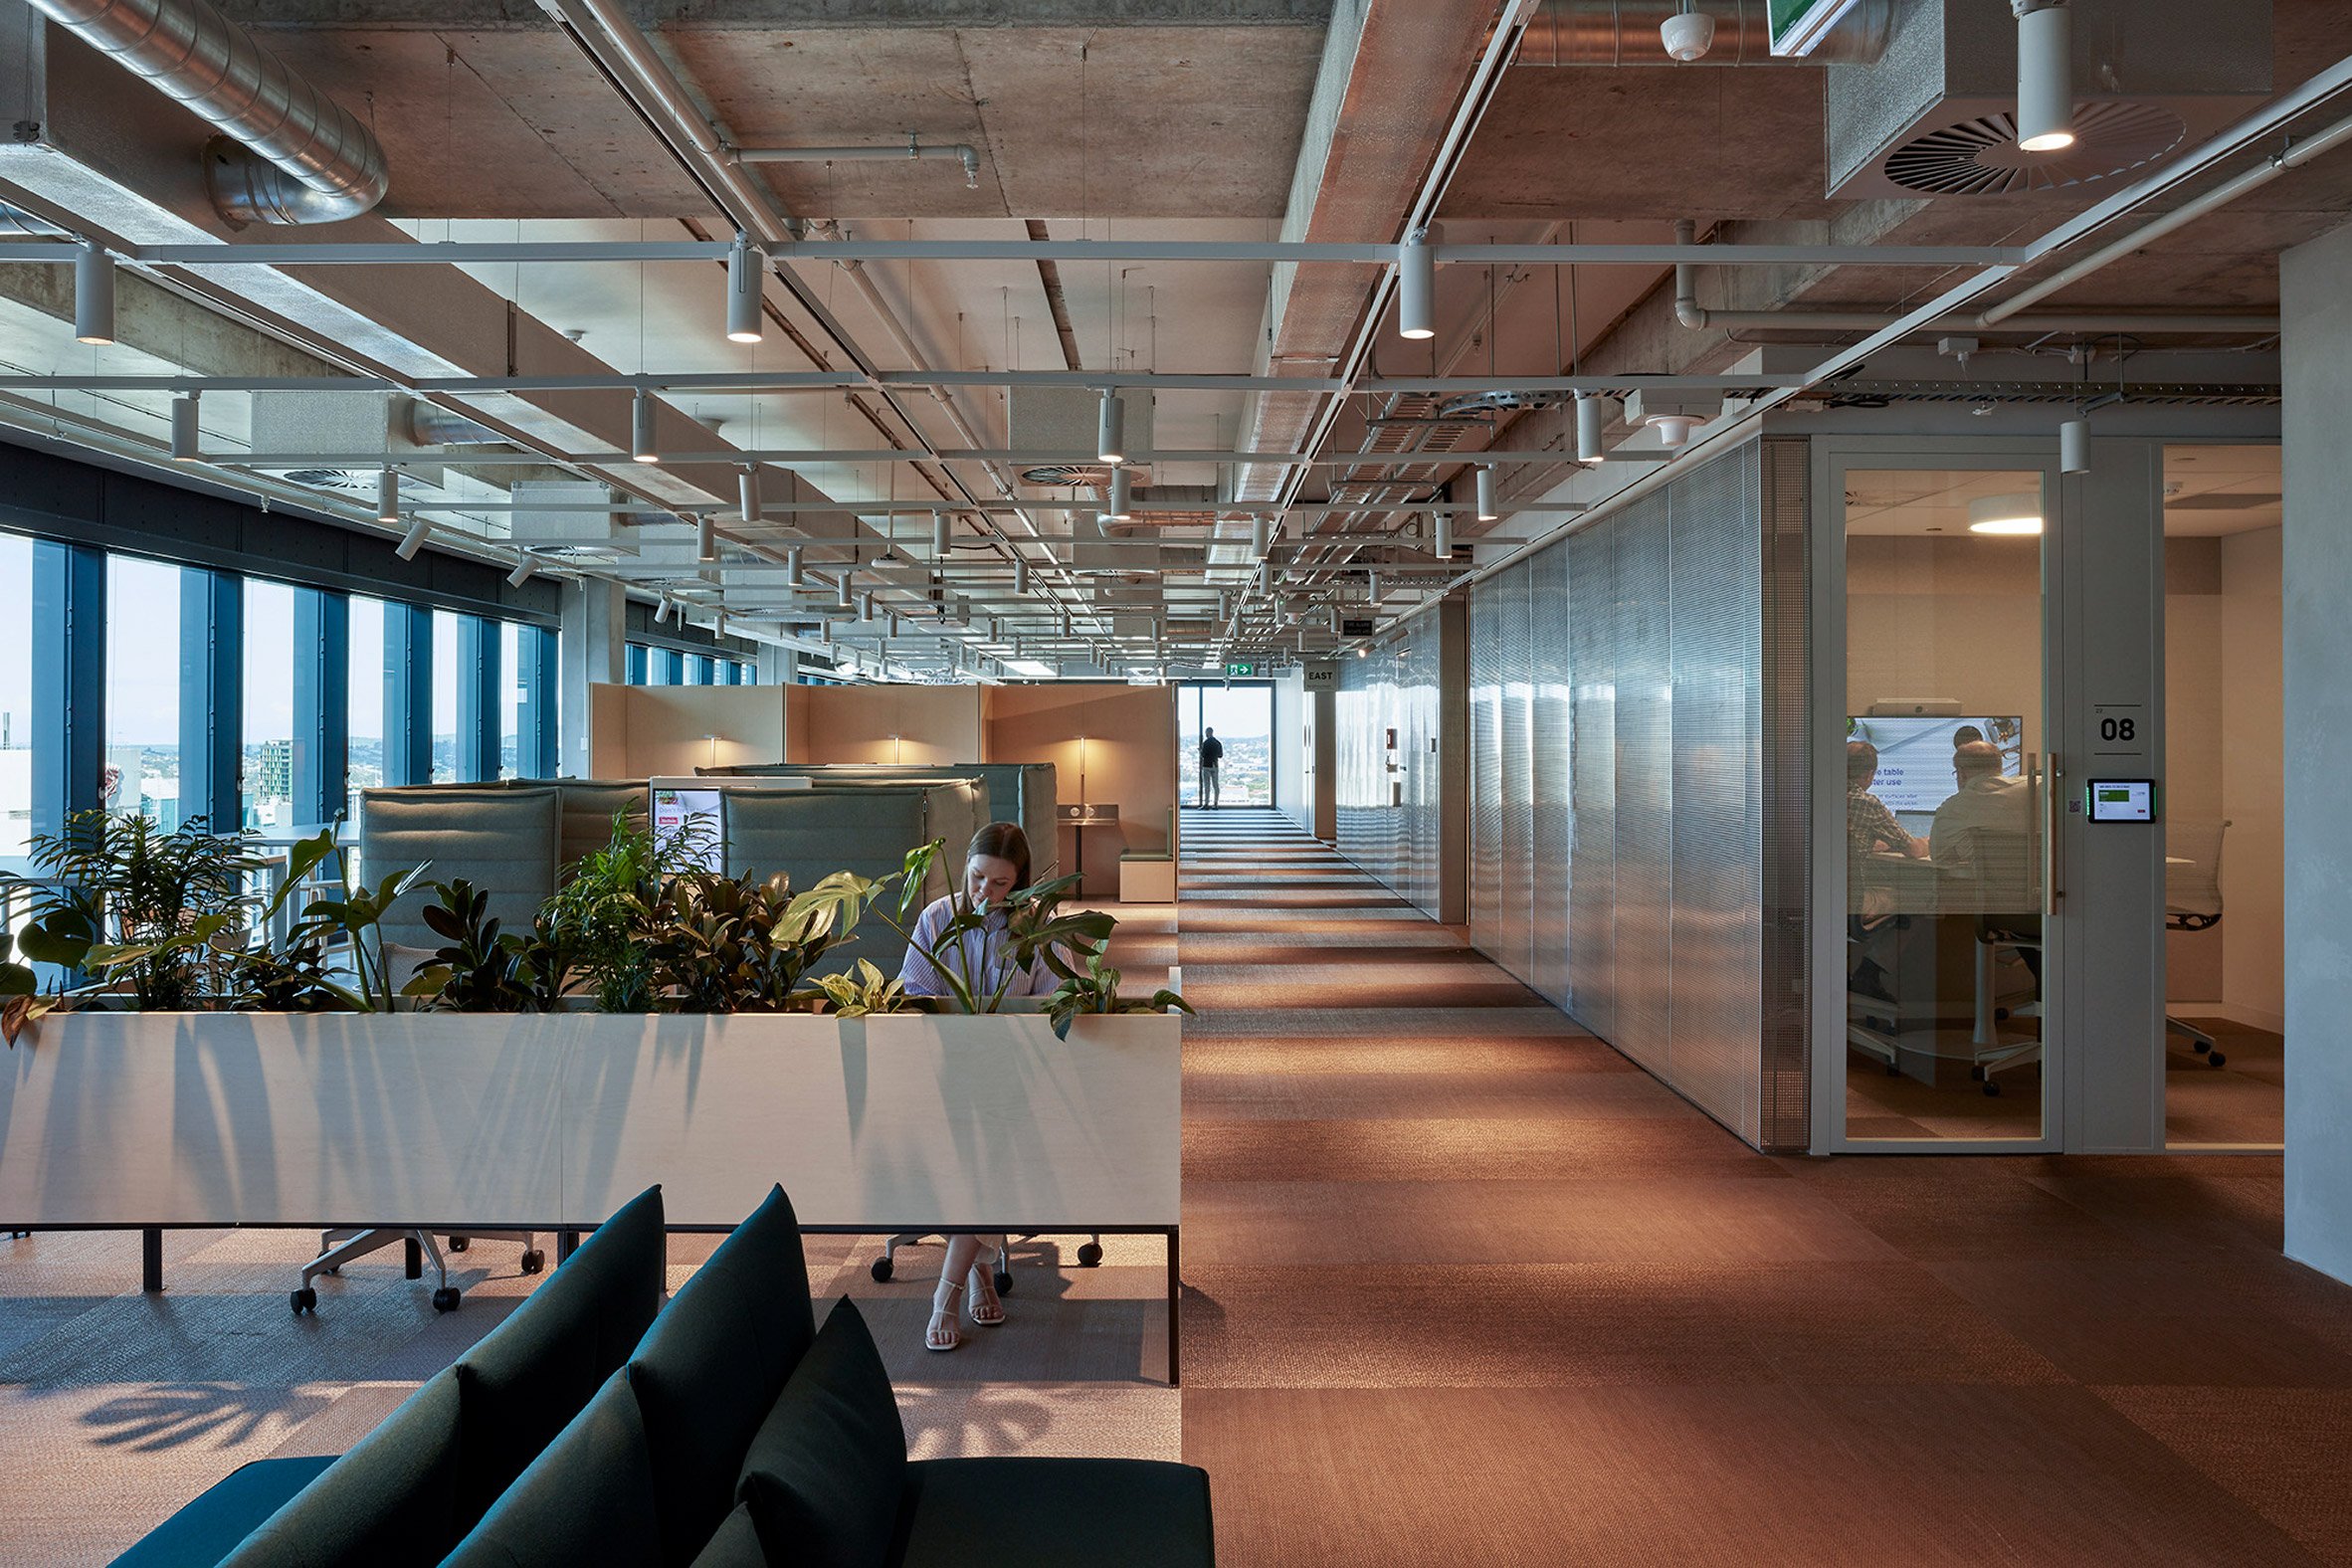 Office interior with exposed concrete ceilings and metalwork